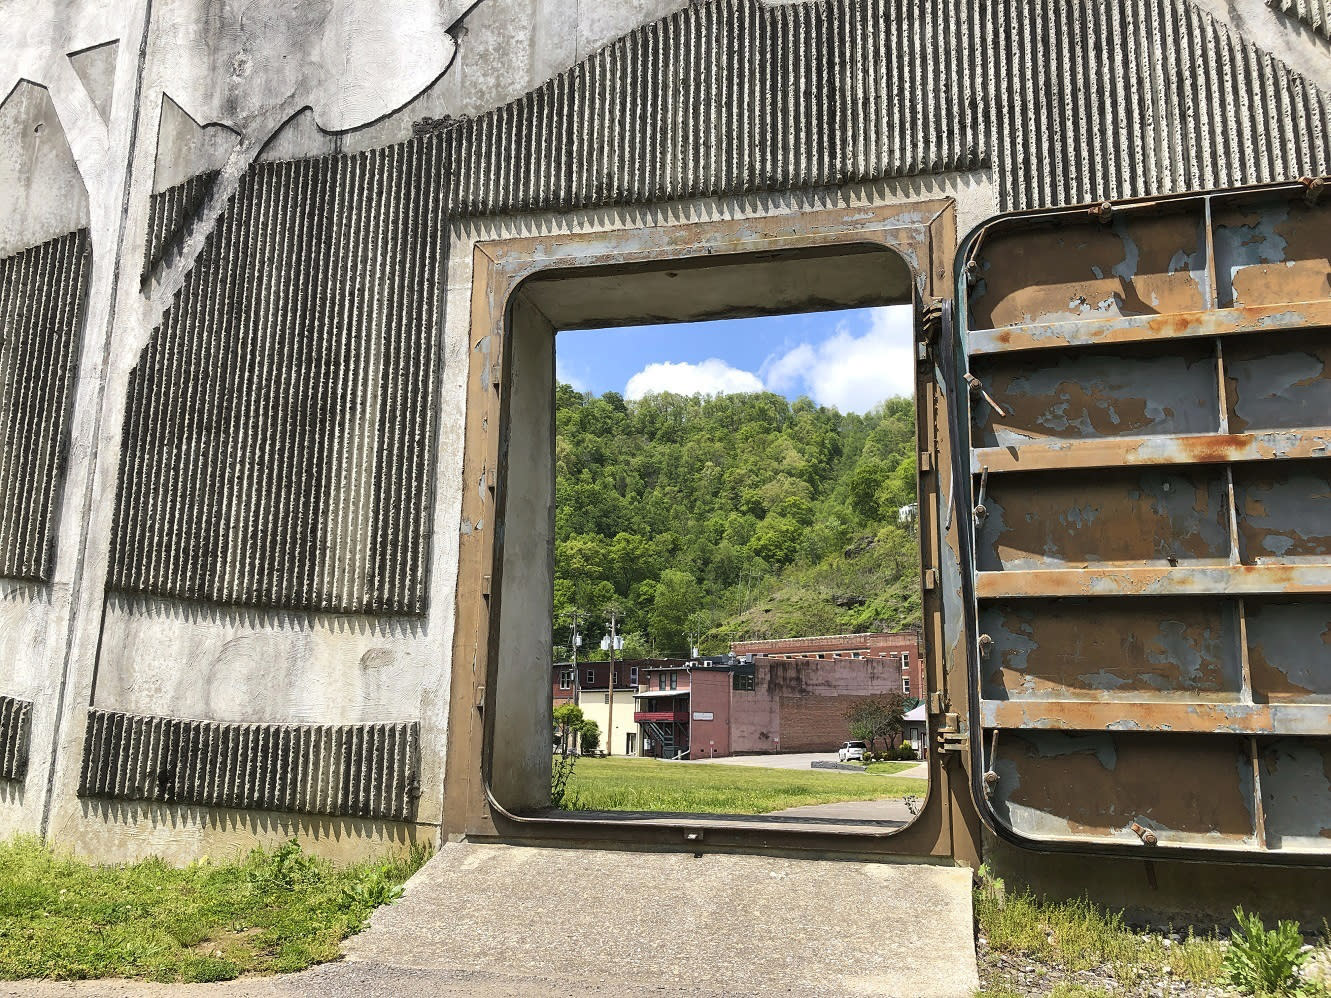 In this Tuesday, May 12, 2020, photo the town of Matewan, W.Va, is shown through a river floodwall gate. A gunfight between miners and detectives hired by a coal company on a Matewan street left 10 people dead on May 19, 1920. It became known as the Matewan Massacre. (AP Photo/John Raby)